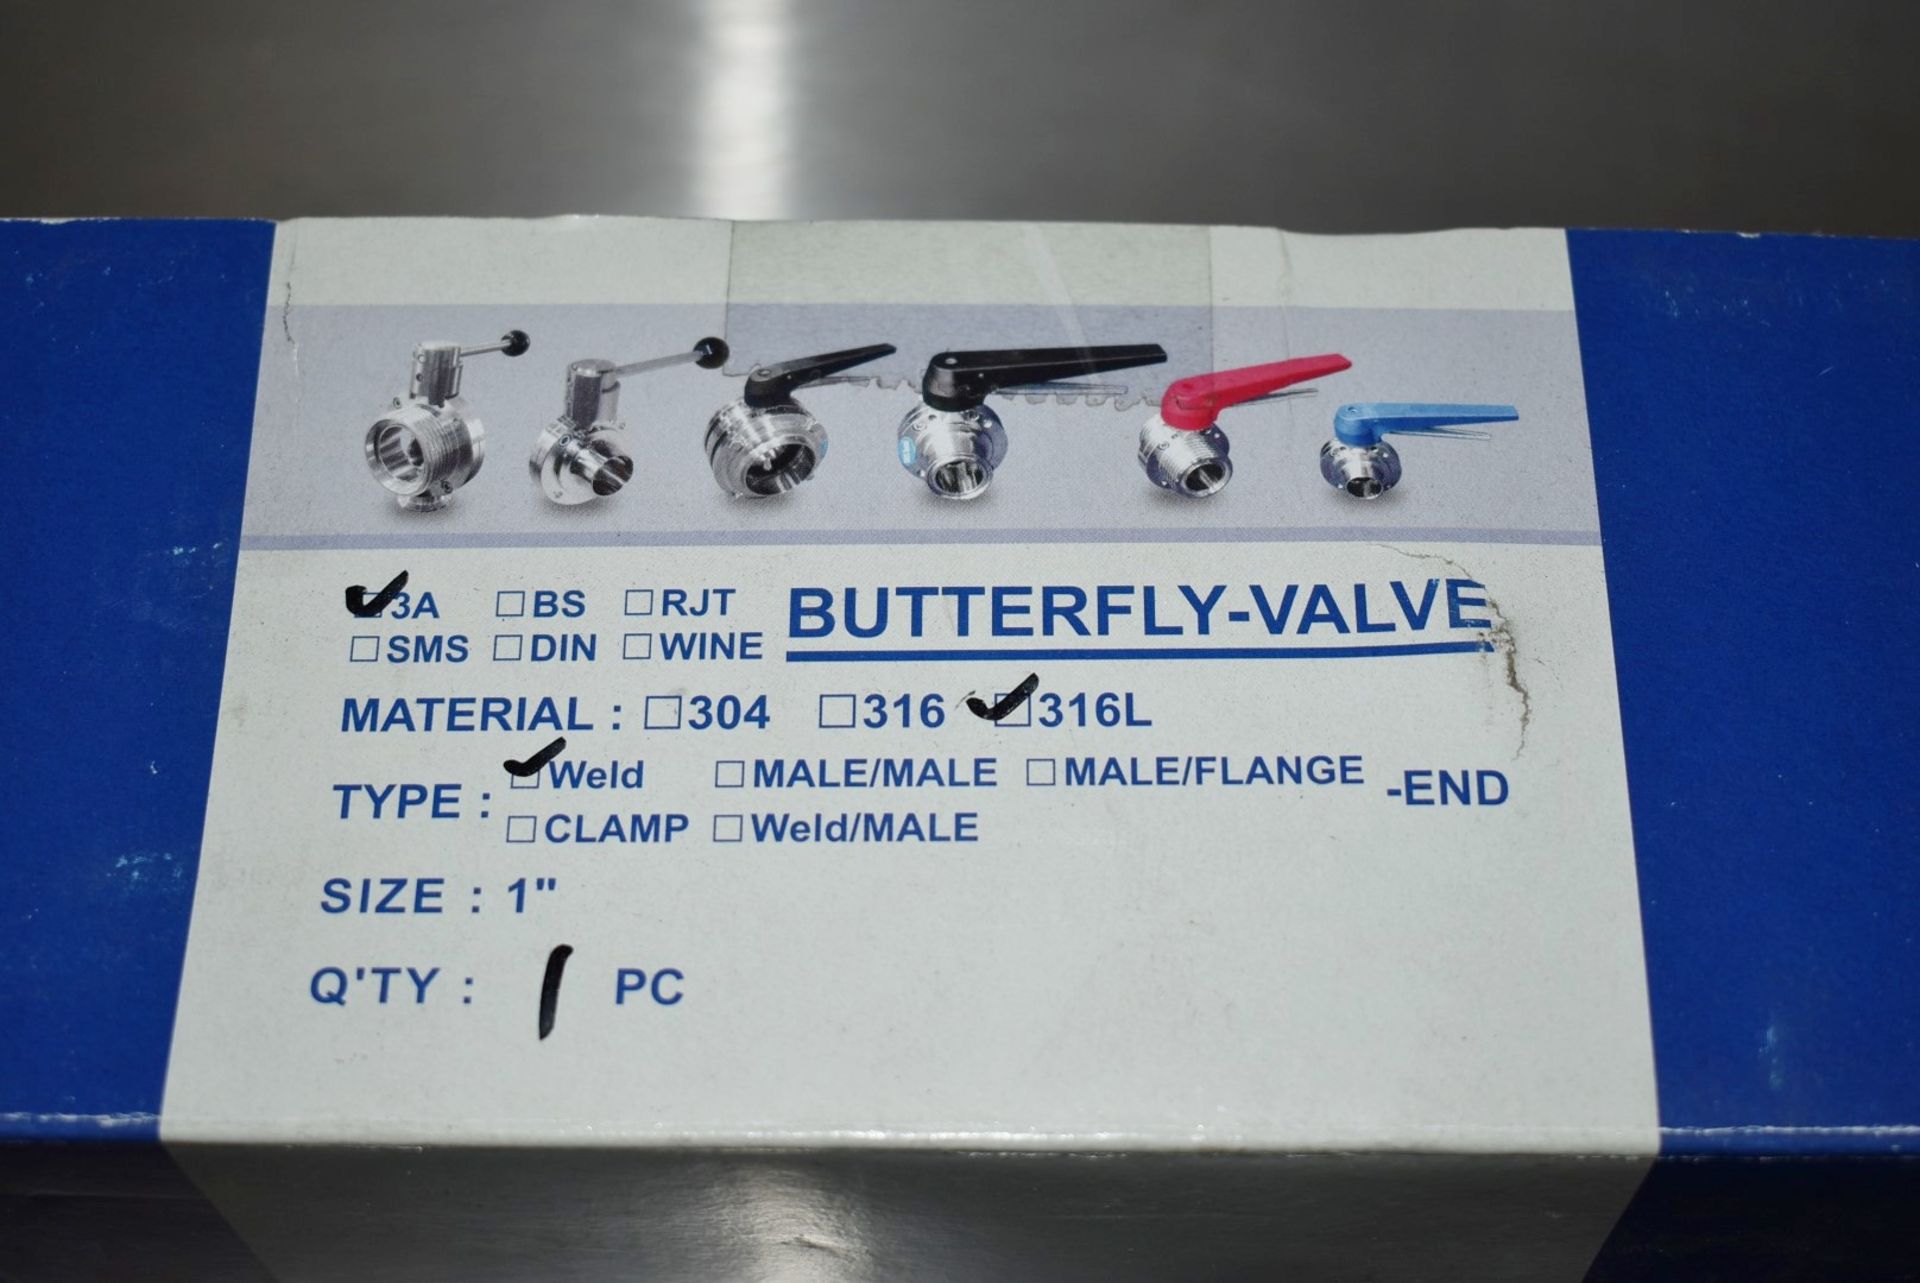 1 x Butterfly Valve - New in Original Box - Model: 3A - Material: 316L - Type: Weld - Size: 1 Inch - - Image 5 of 5